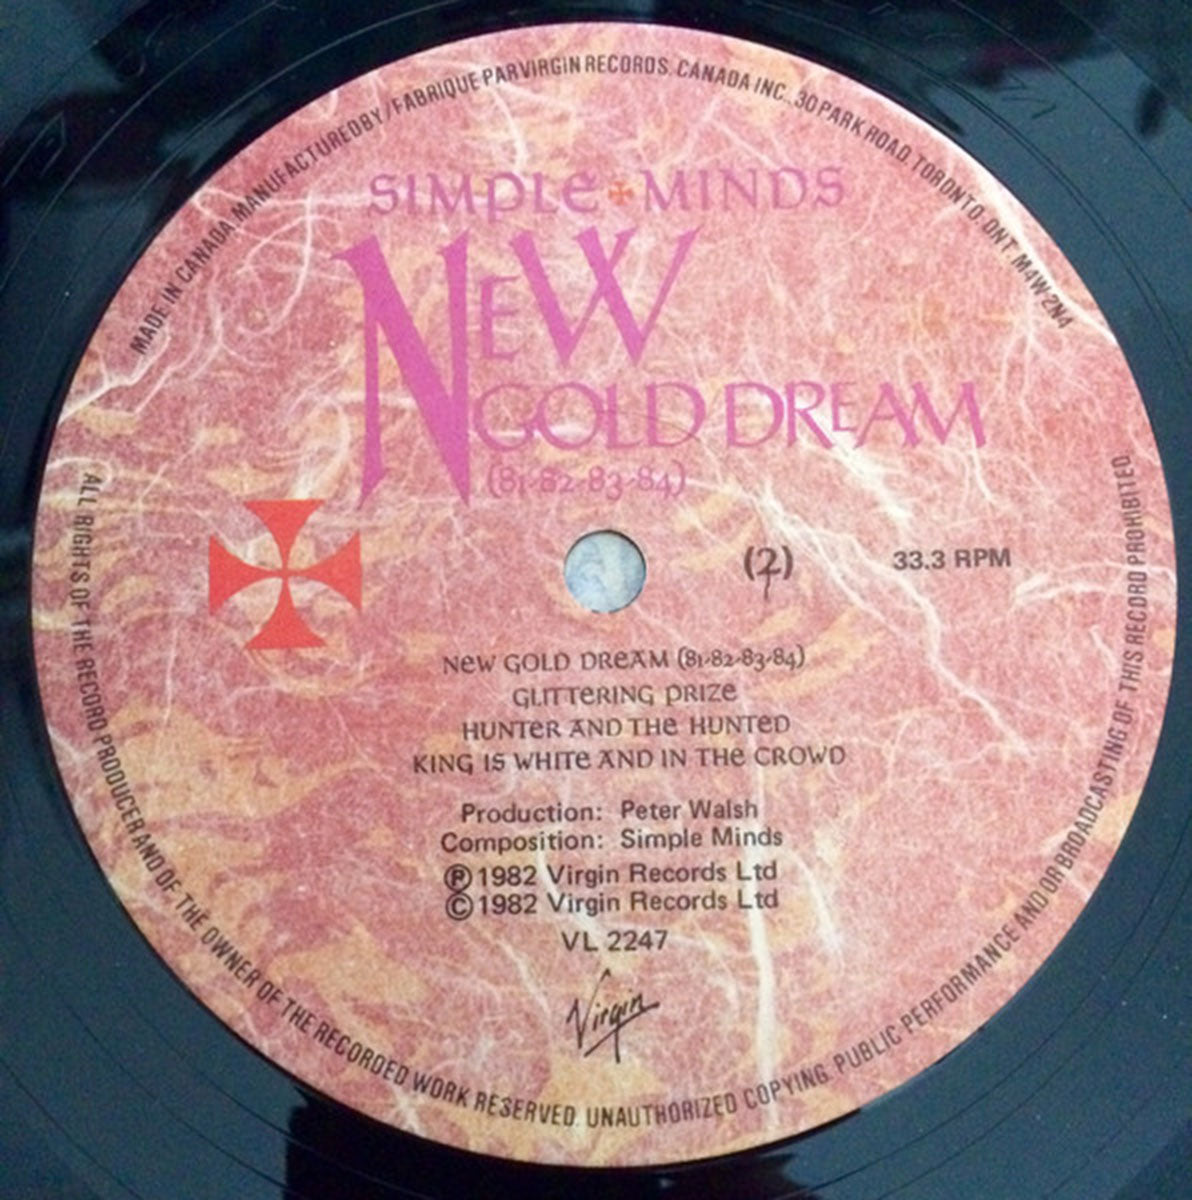 Simple Minds – New Gold Dream (81-82-83-84)